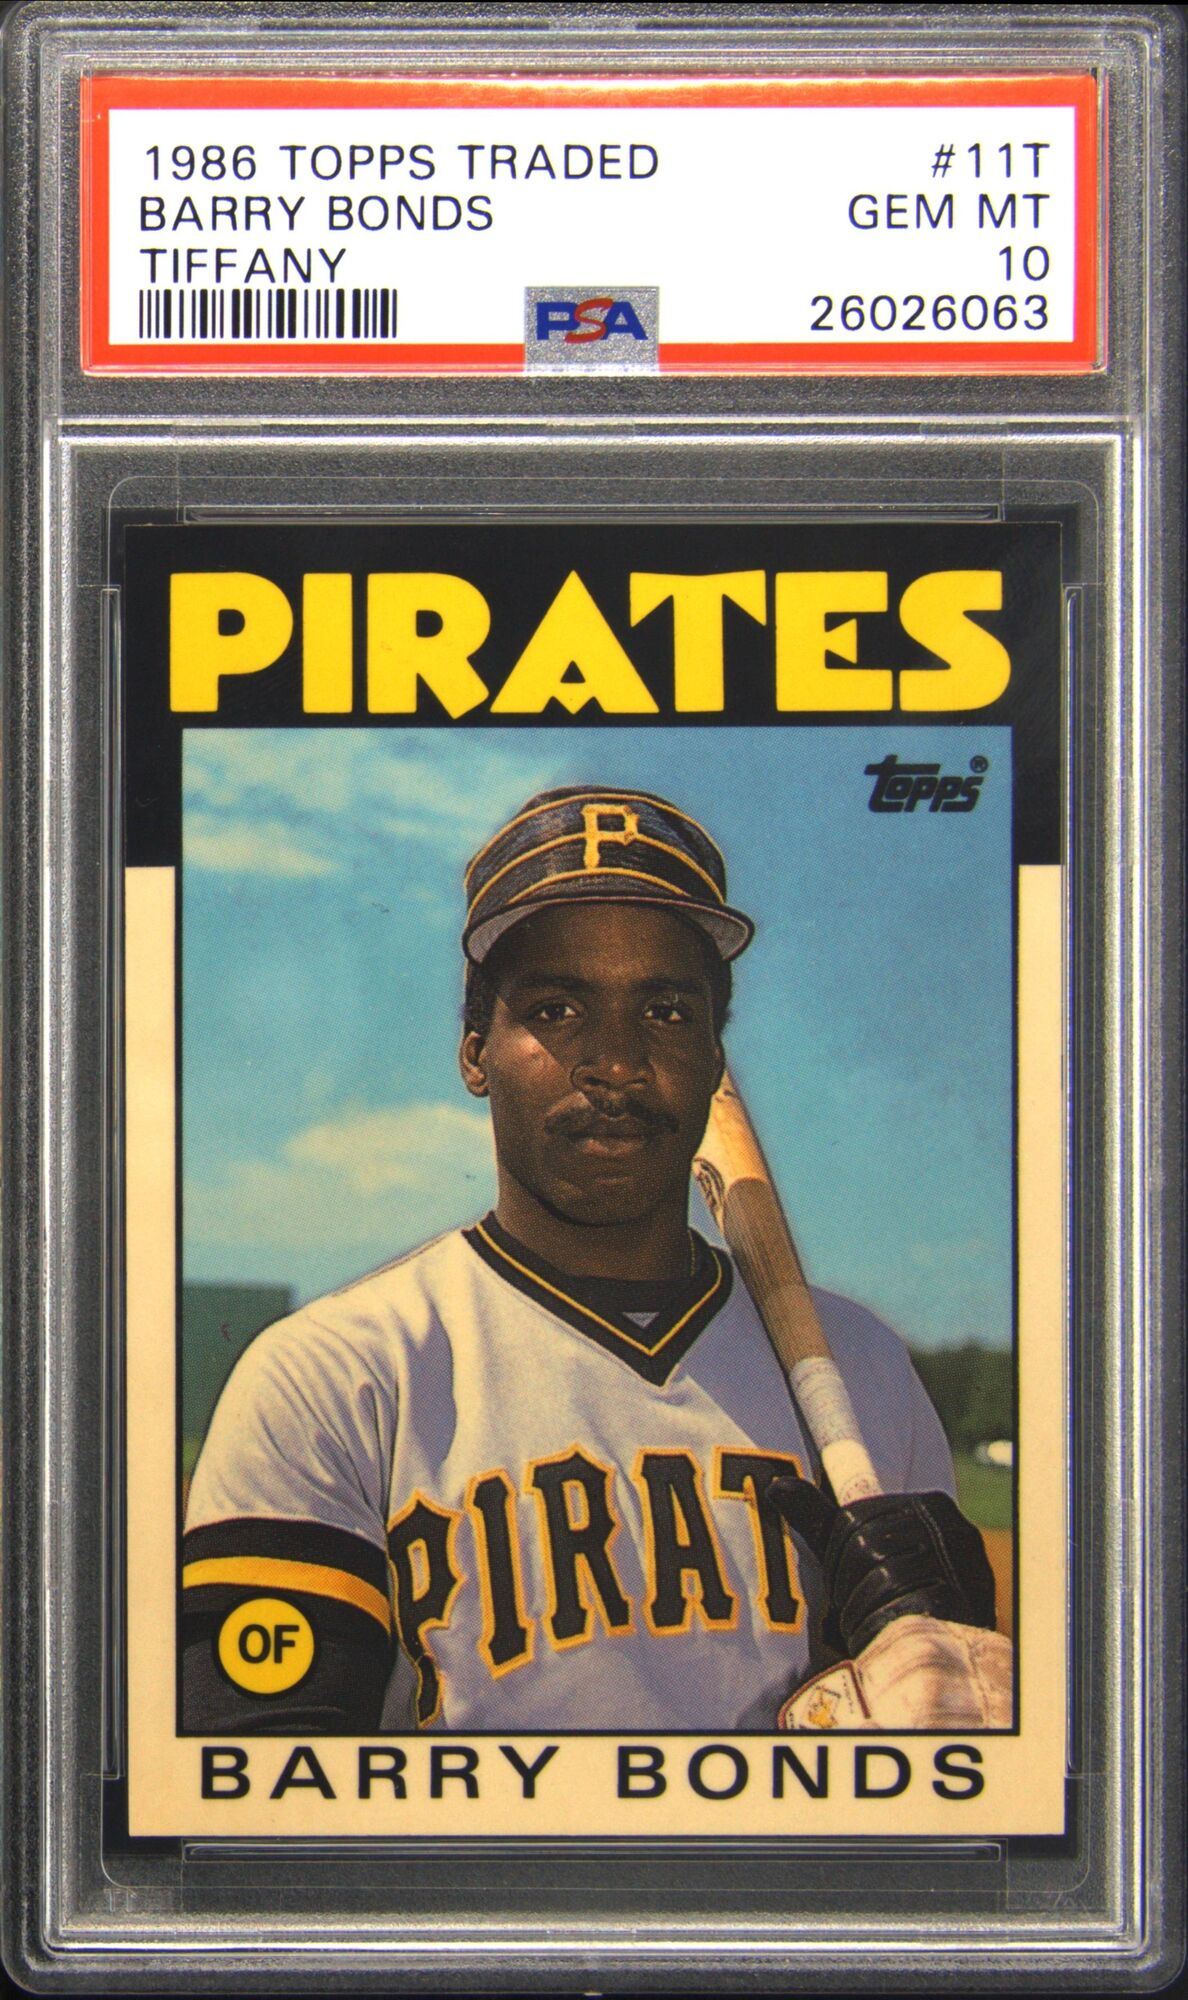 Top 25 Highest-Selling Baseball Cards from the Junk Wax Era on eBay